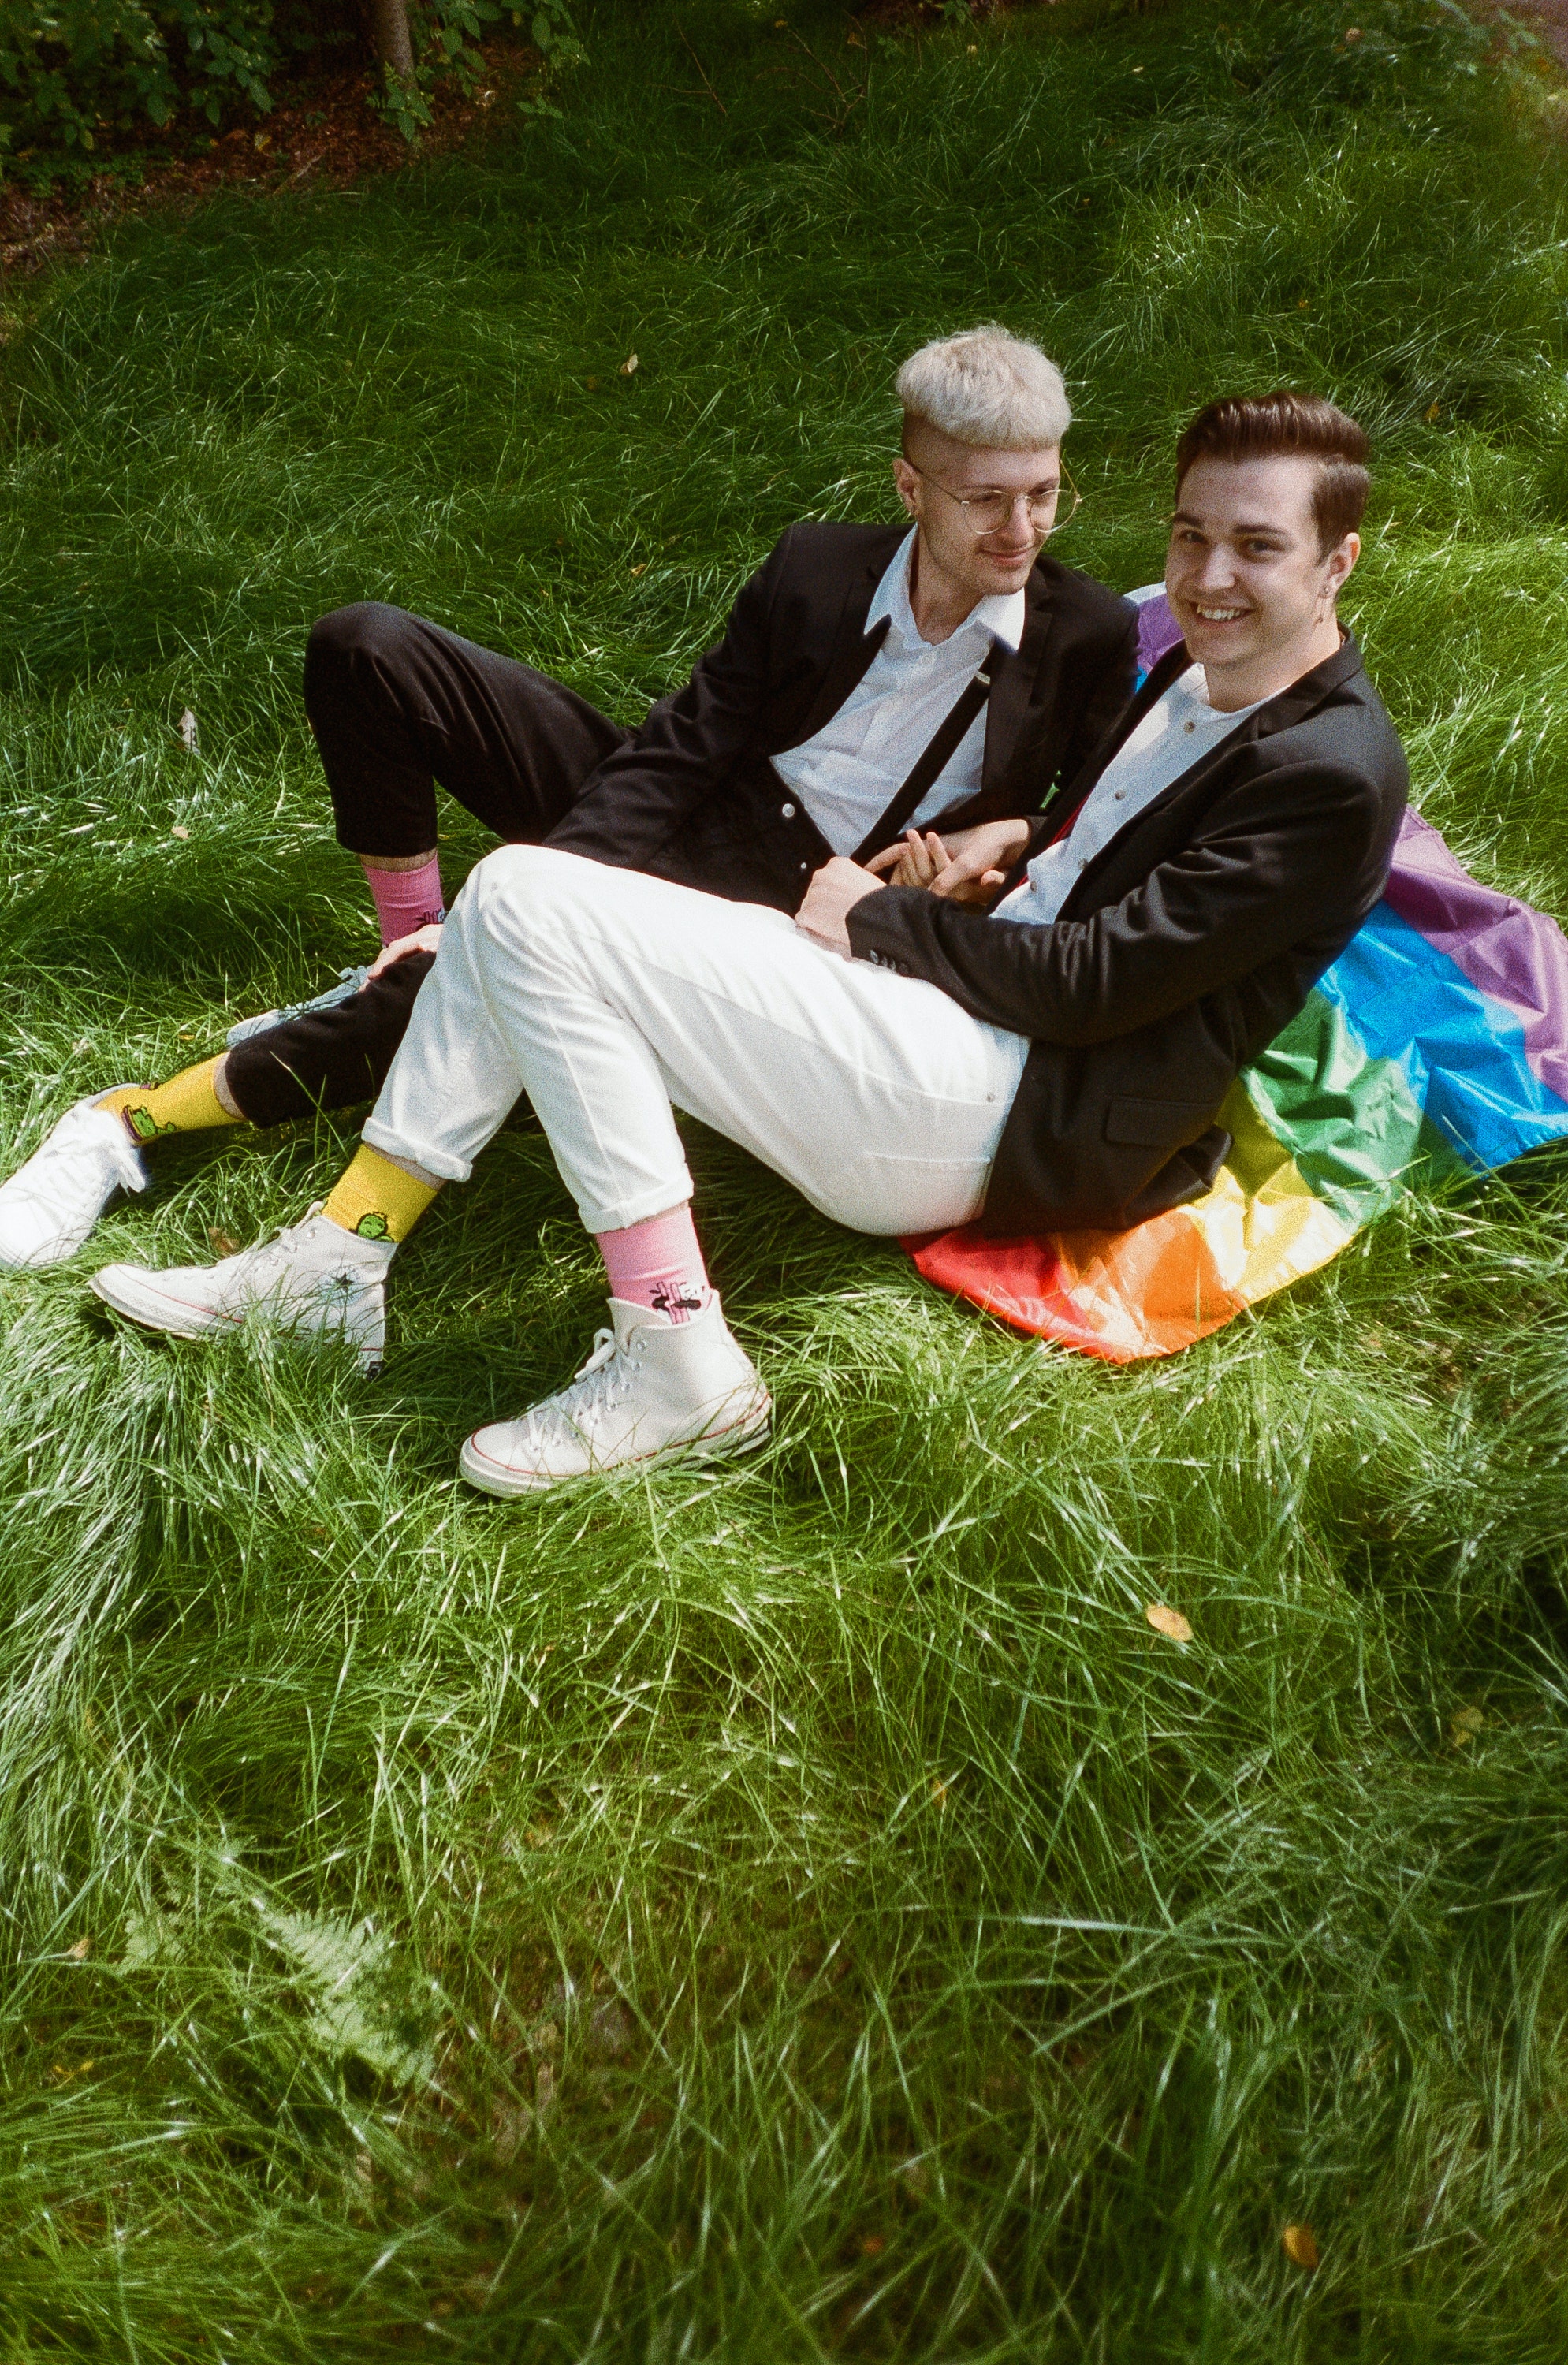 Two males on grass with rainbow flag